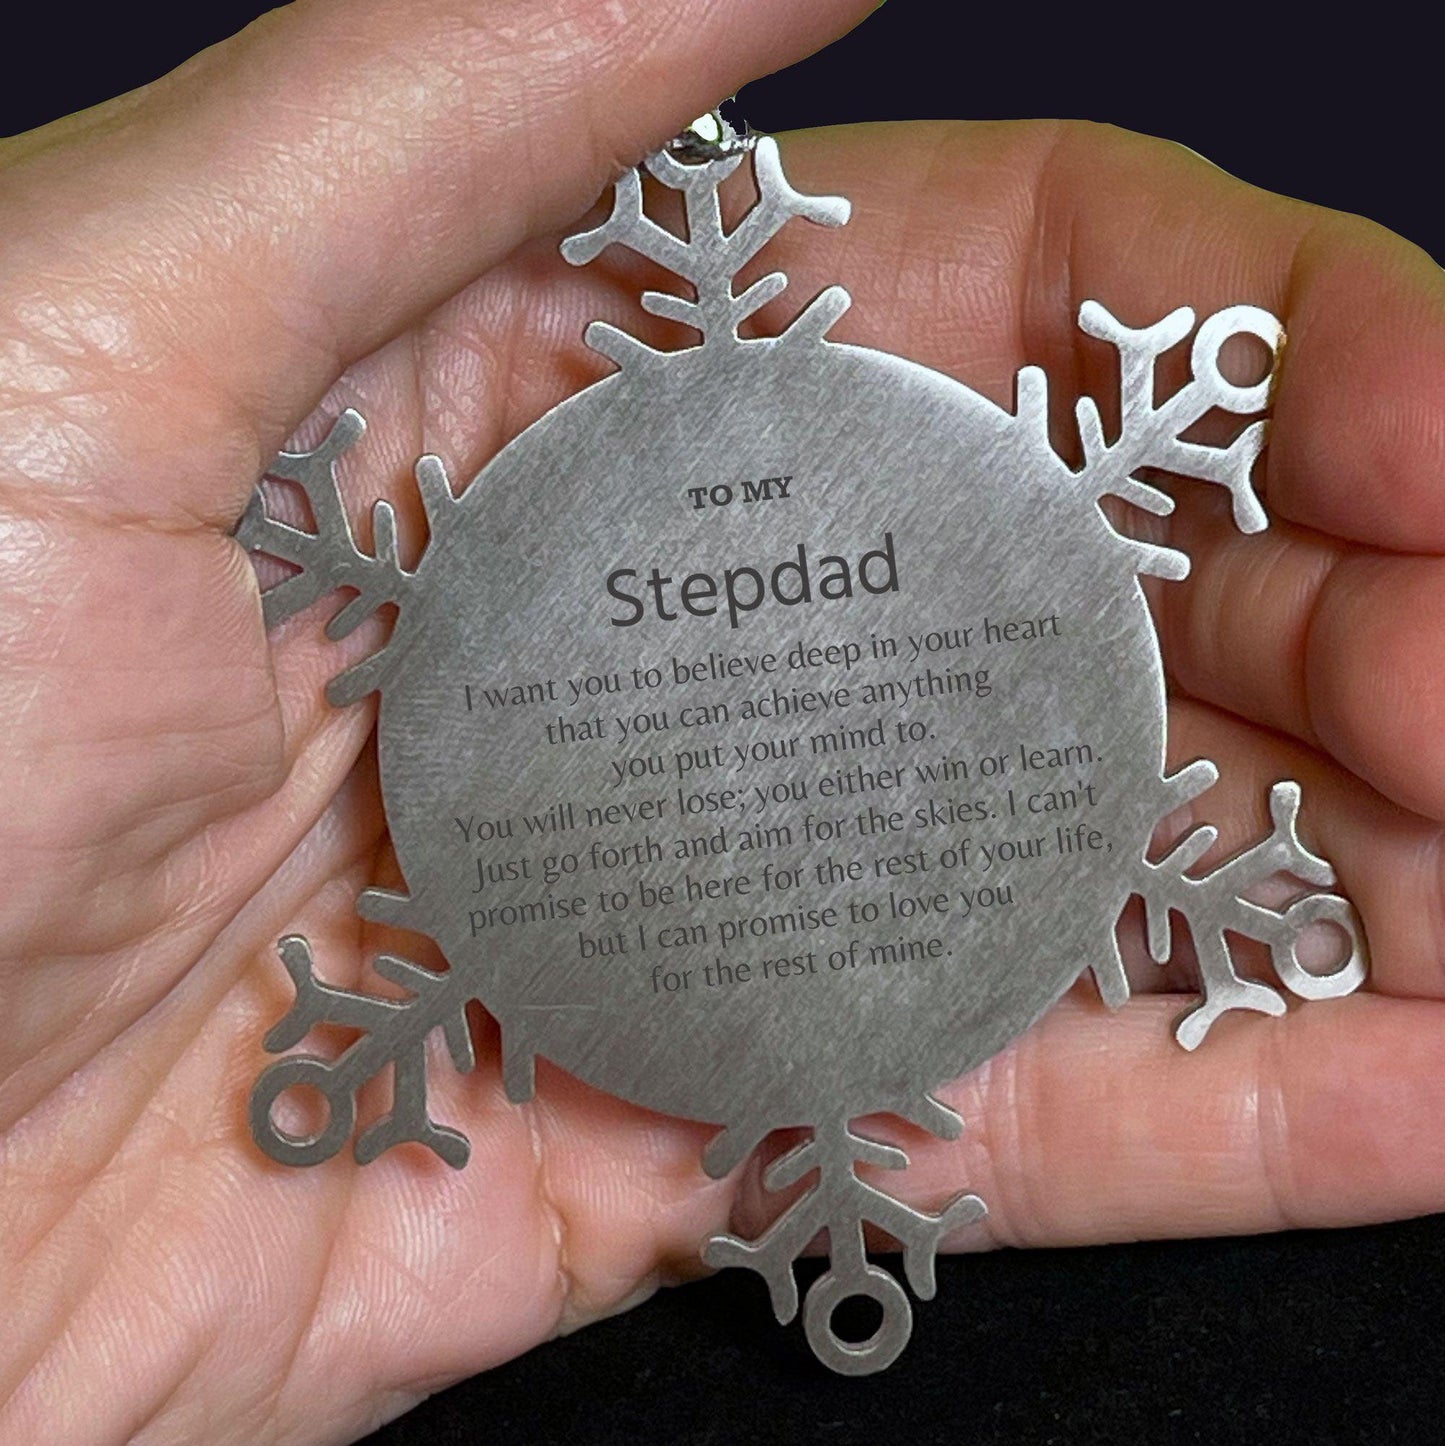 Motivational Stepdad Snowflake Ornament, Stepdad I can promise to love you for the rest of mine, Christmas Birthday Gift - Mallard Moon Gift Shop